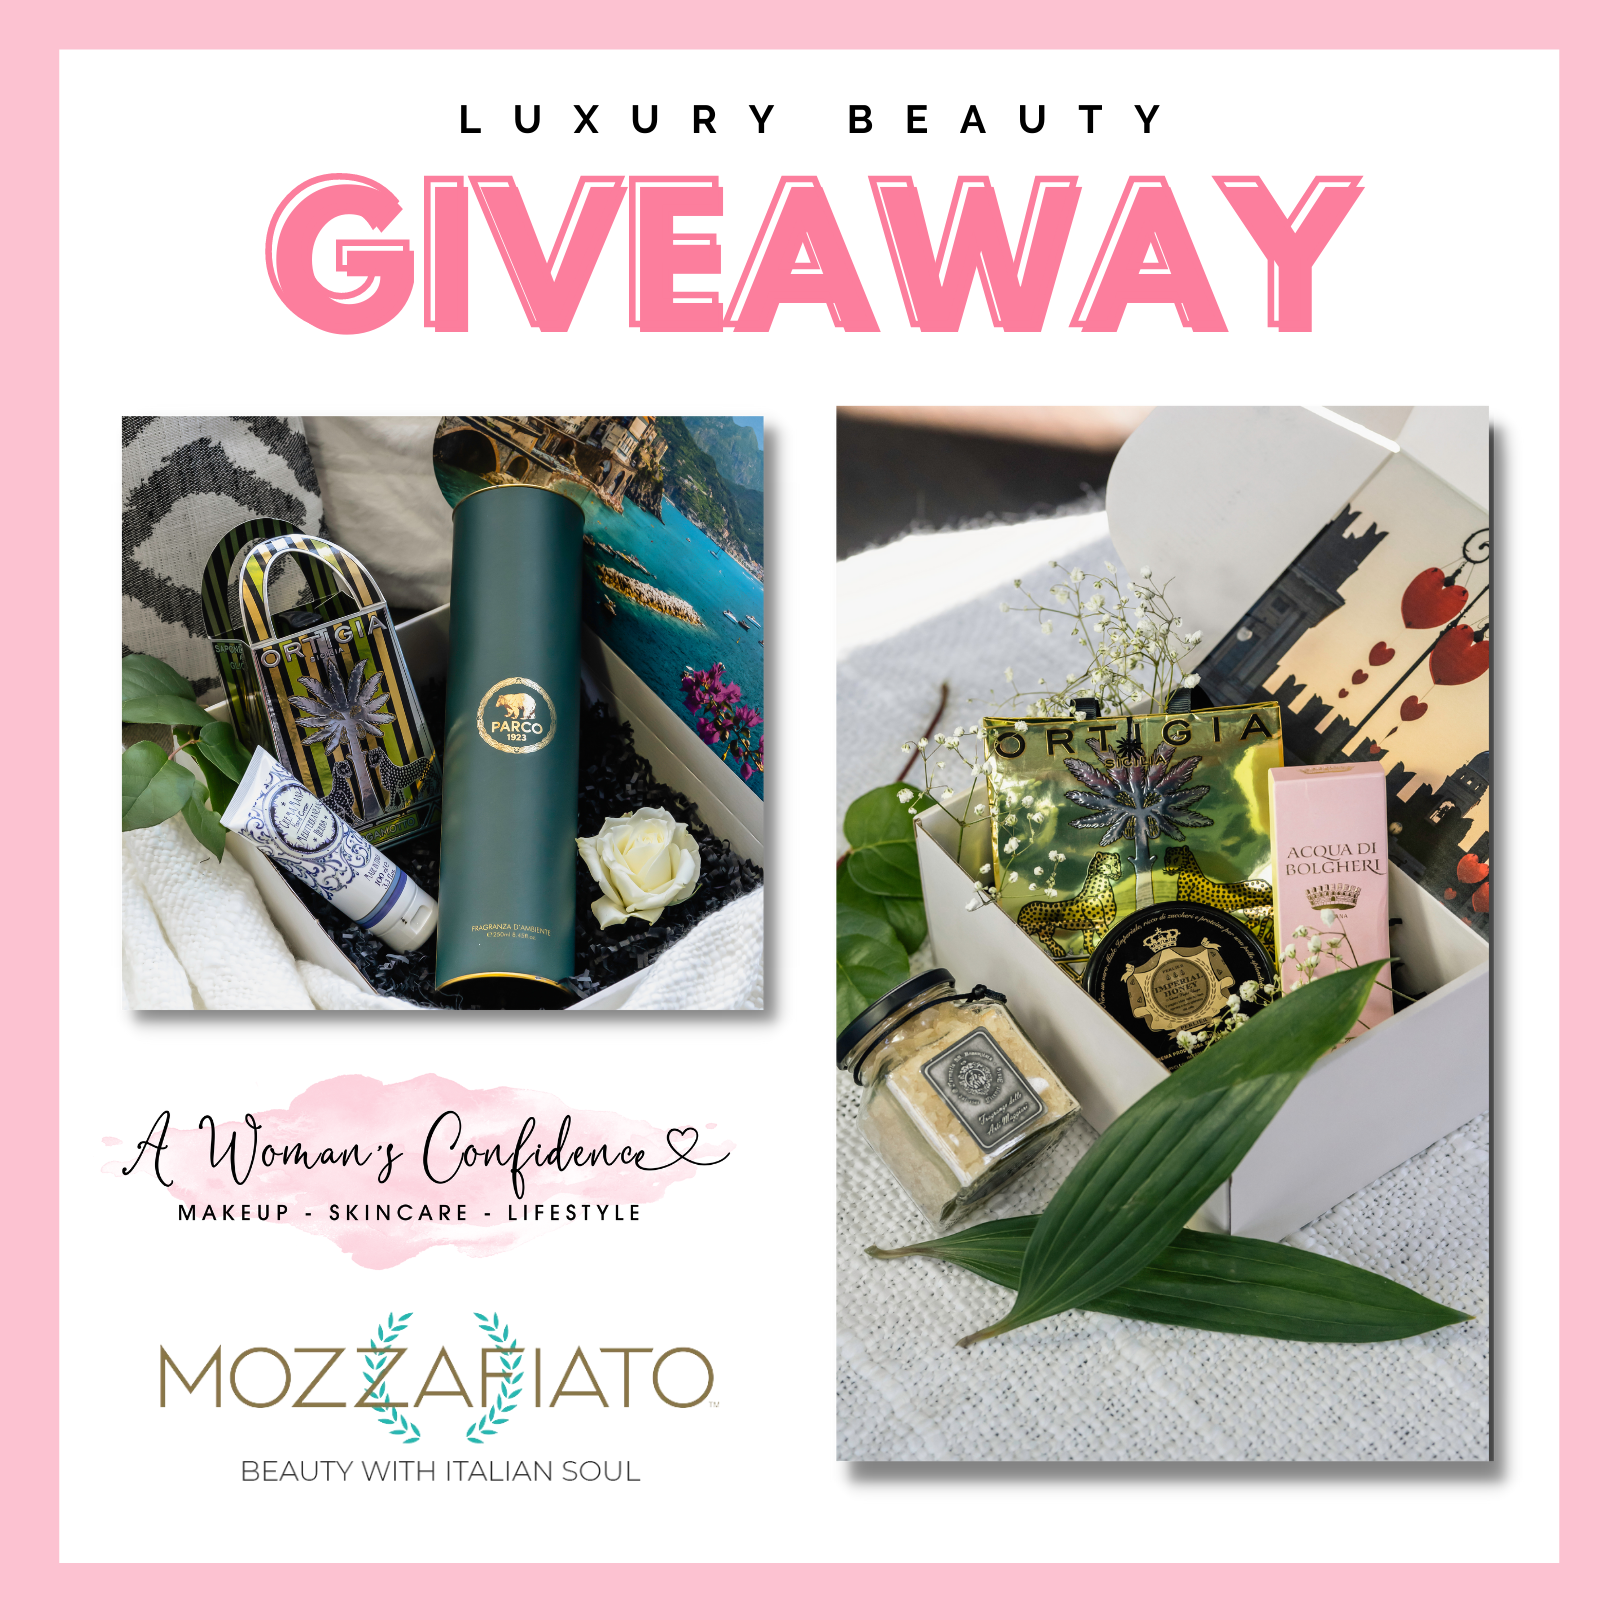 september Frastøde Bevæger sig ikke GIVEAWAY: Win a quarterly luxury beauty box subscription worth $197 for 1  year from Mozzafiato - A Woman's Confidence